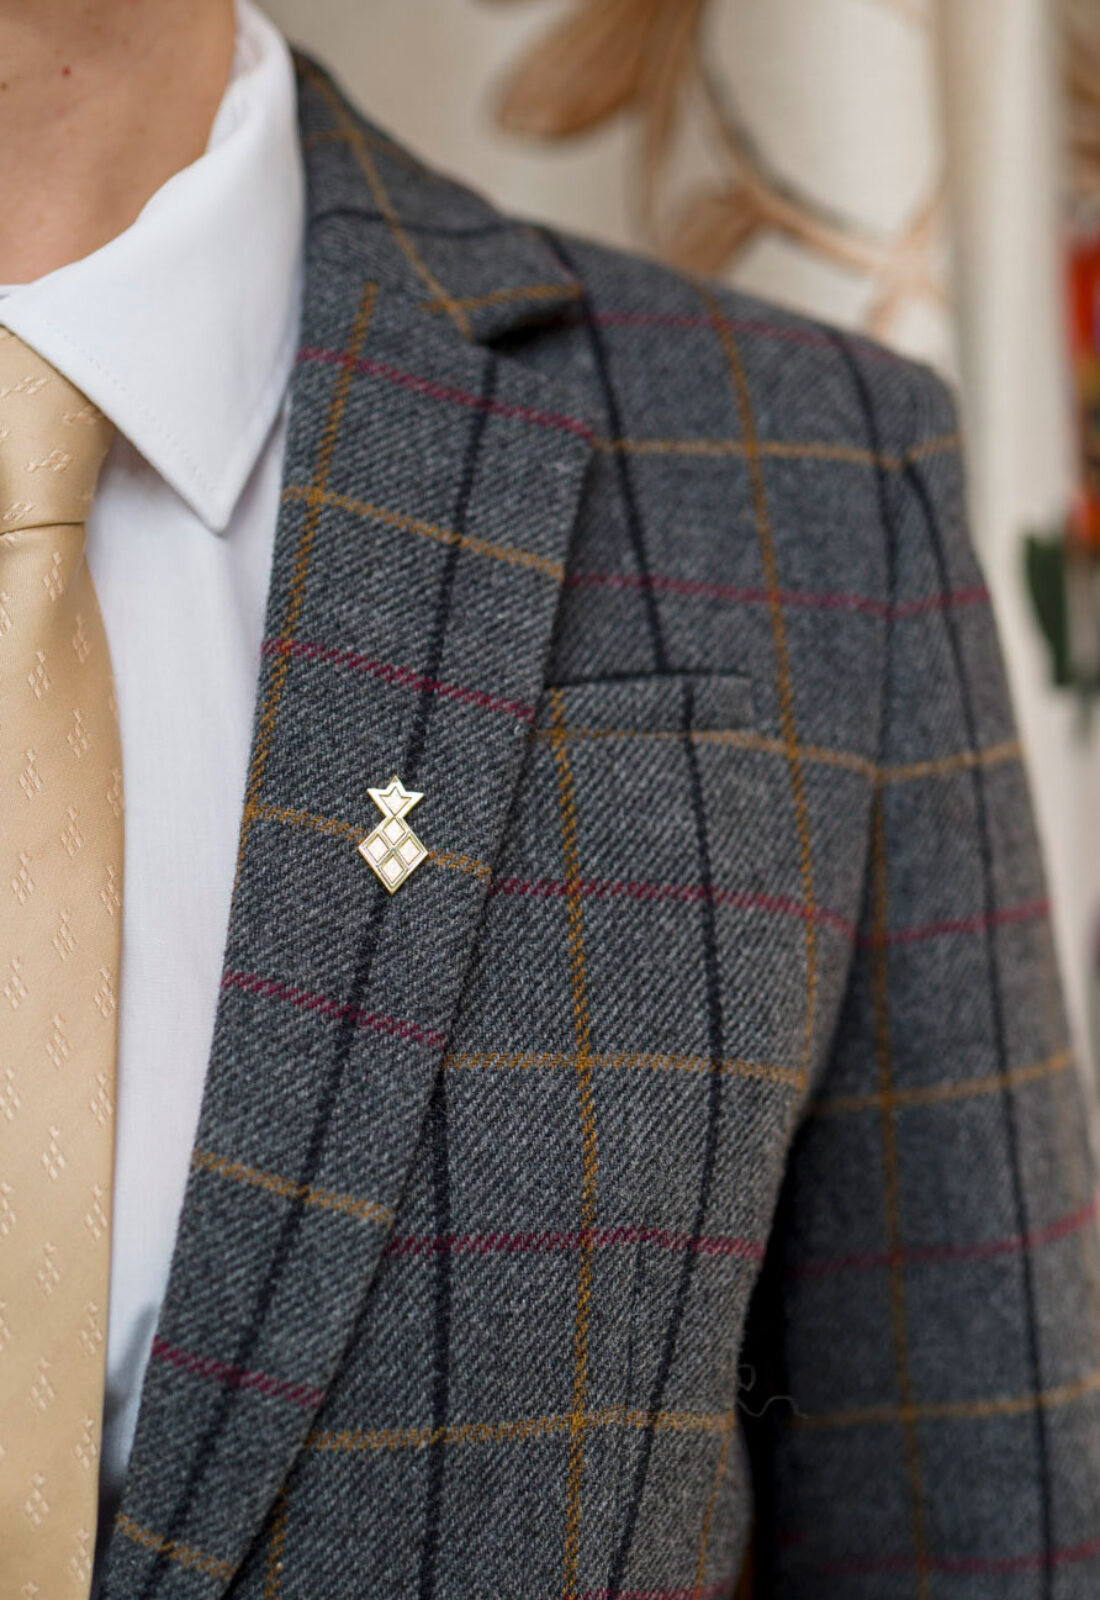 Uniform featuring branded custom lapel pin, tie and tartan smart jacket designed by 3Stories Interior Design and Branding creative agency for Roast Restaurant London